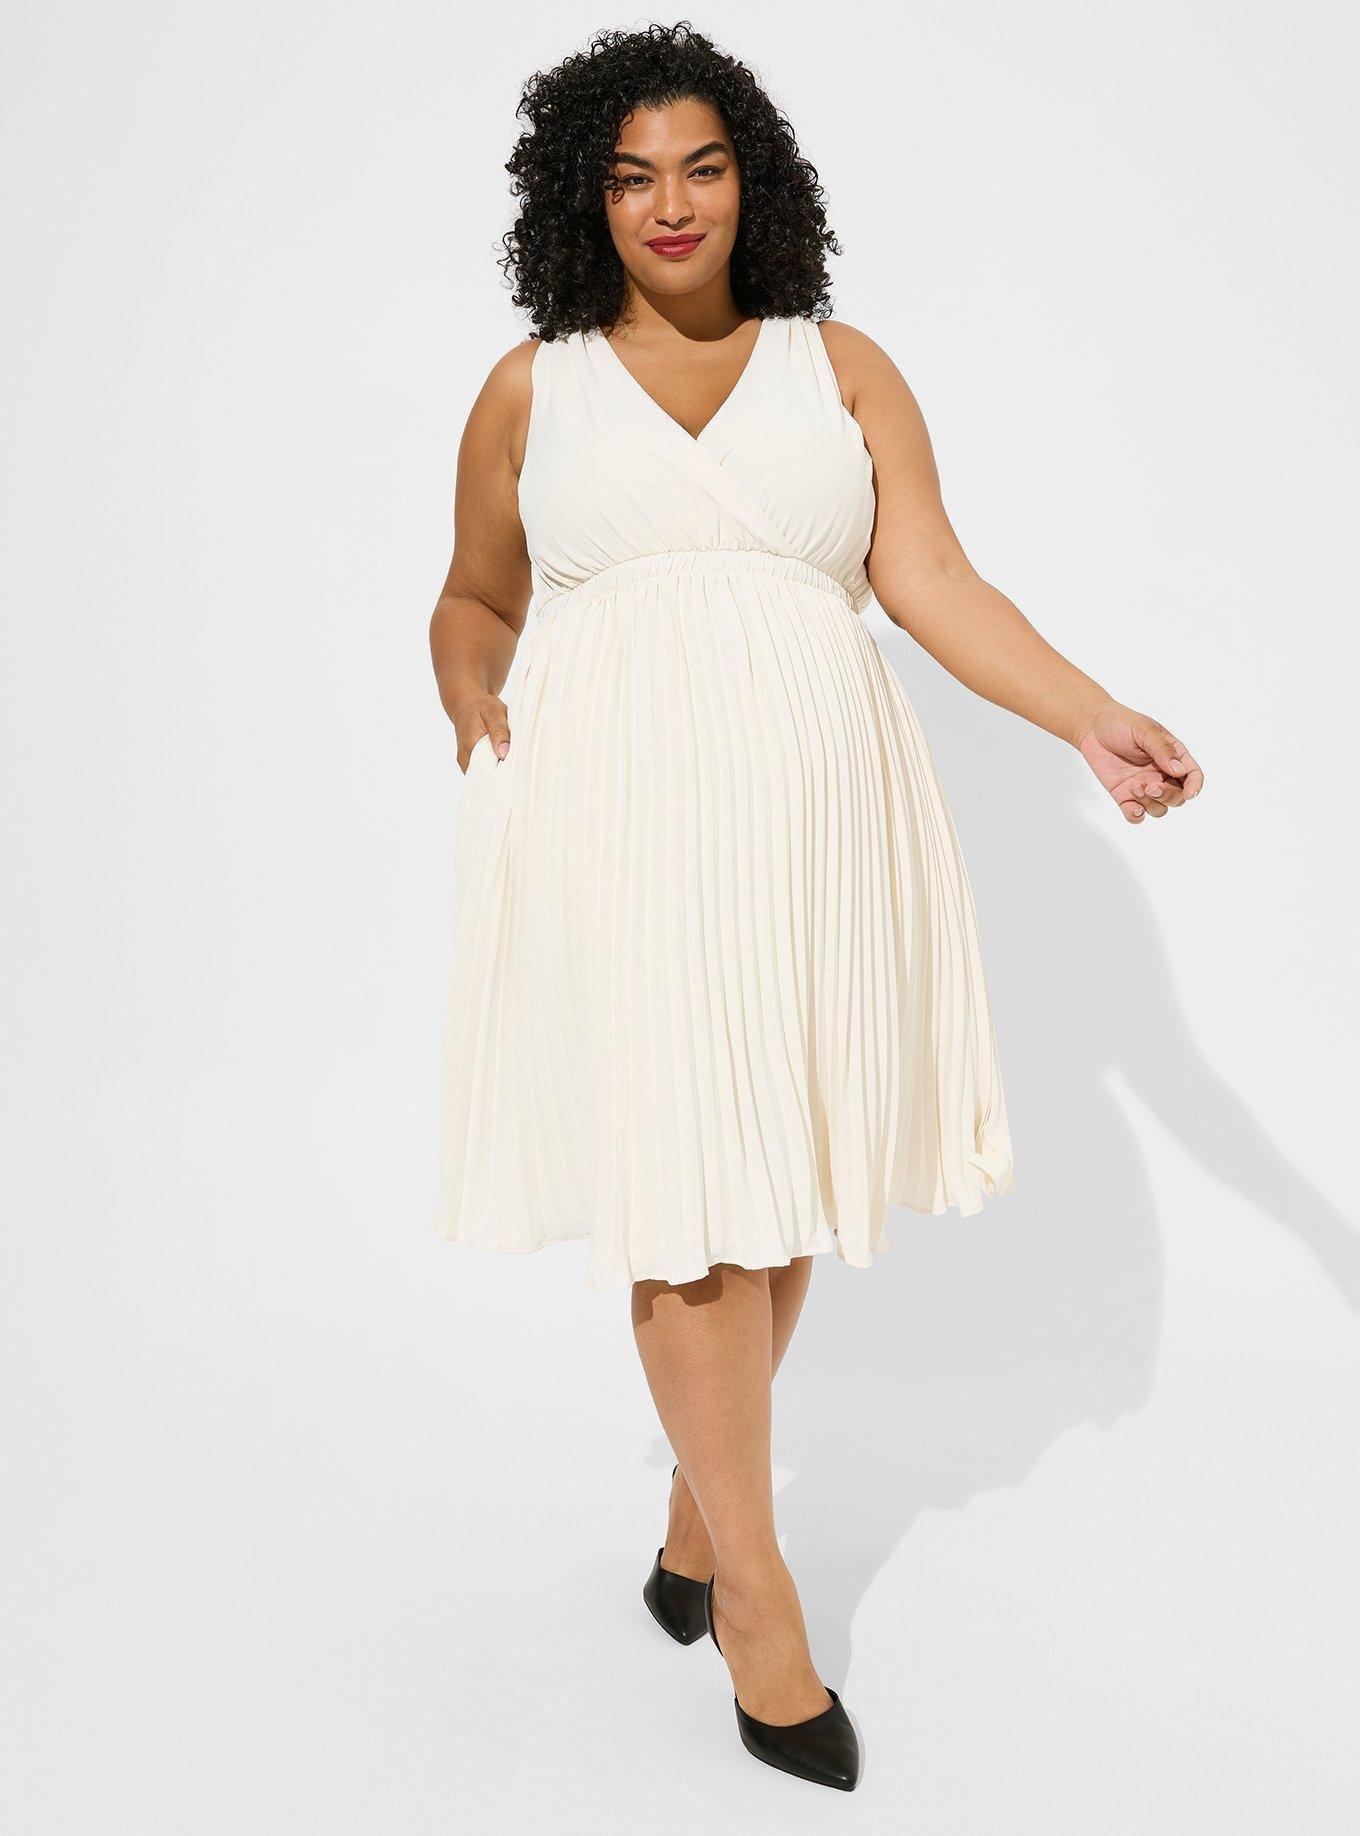 Marilyn Monroe Pleated Low Cut Halter Cocktail Dress-White